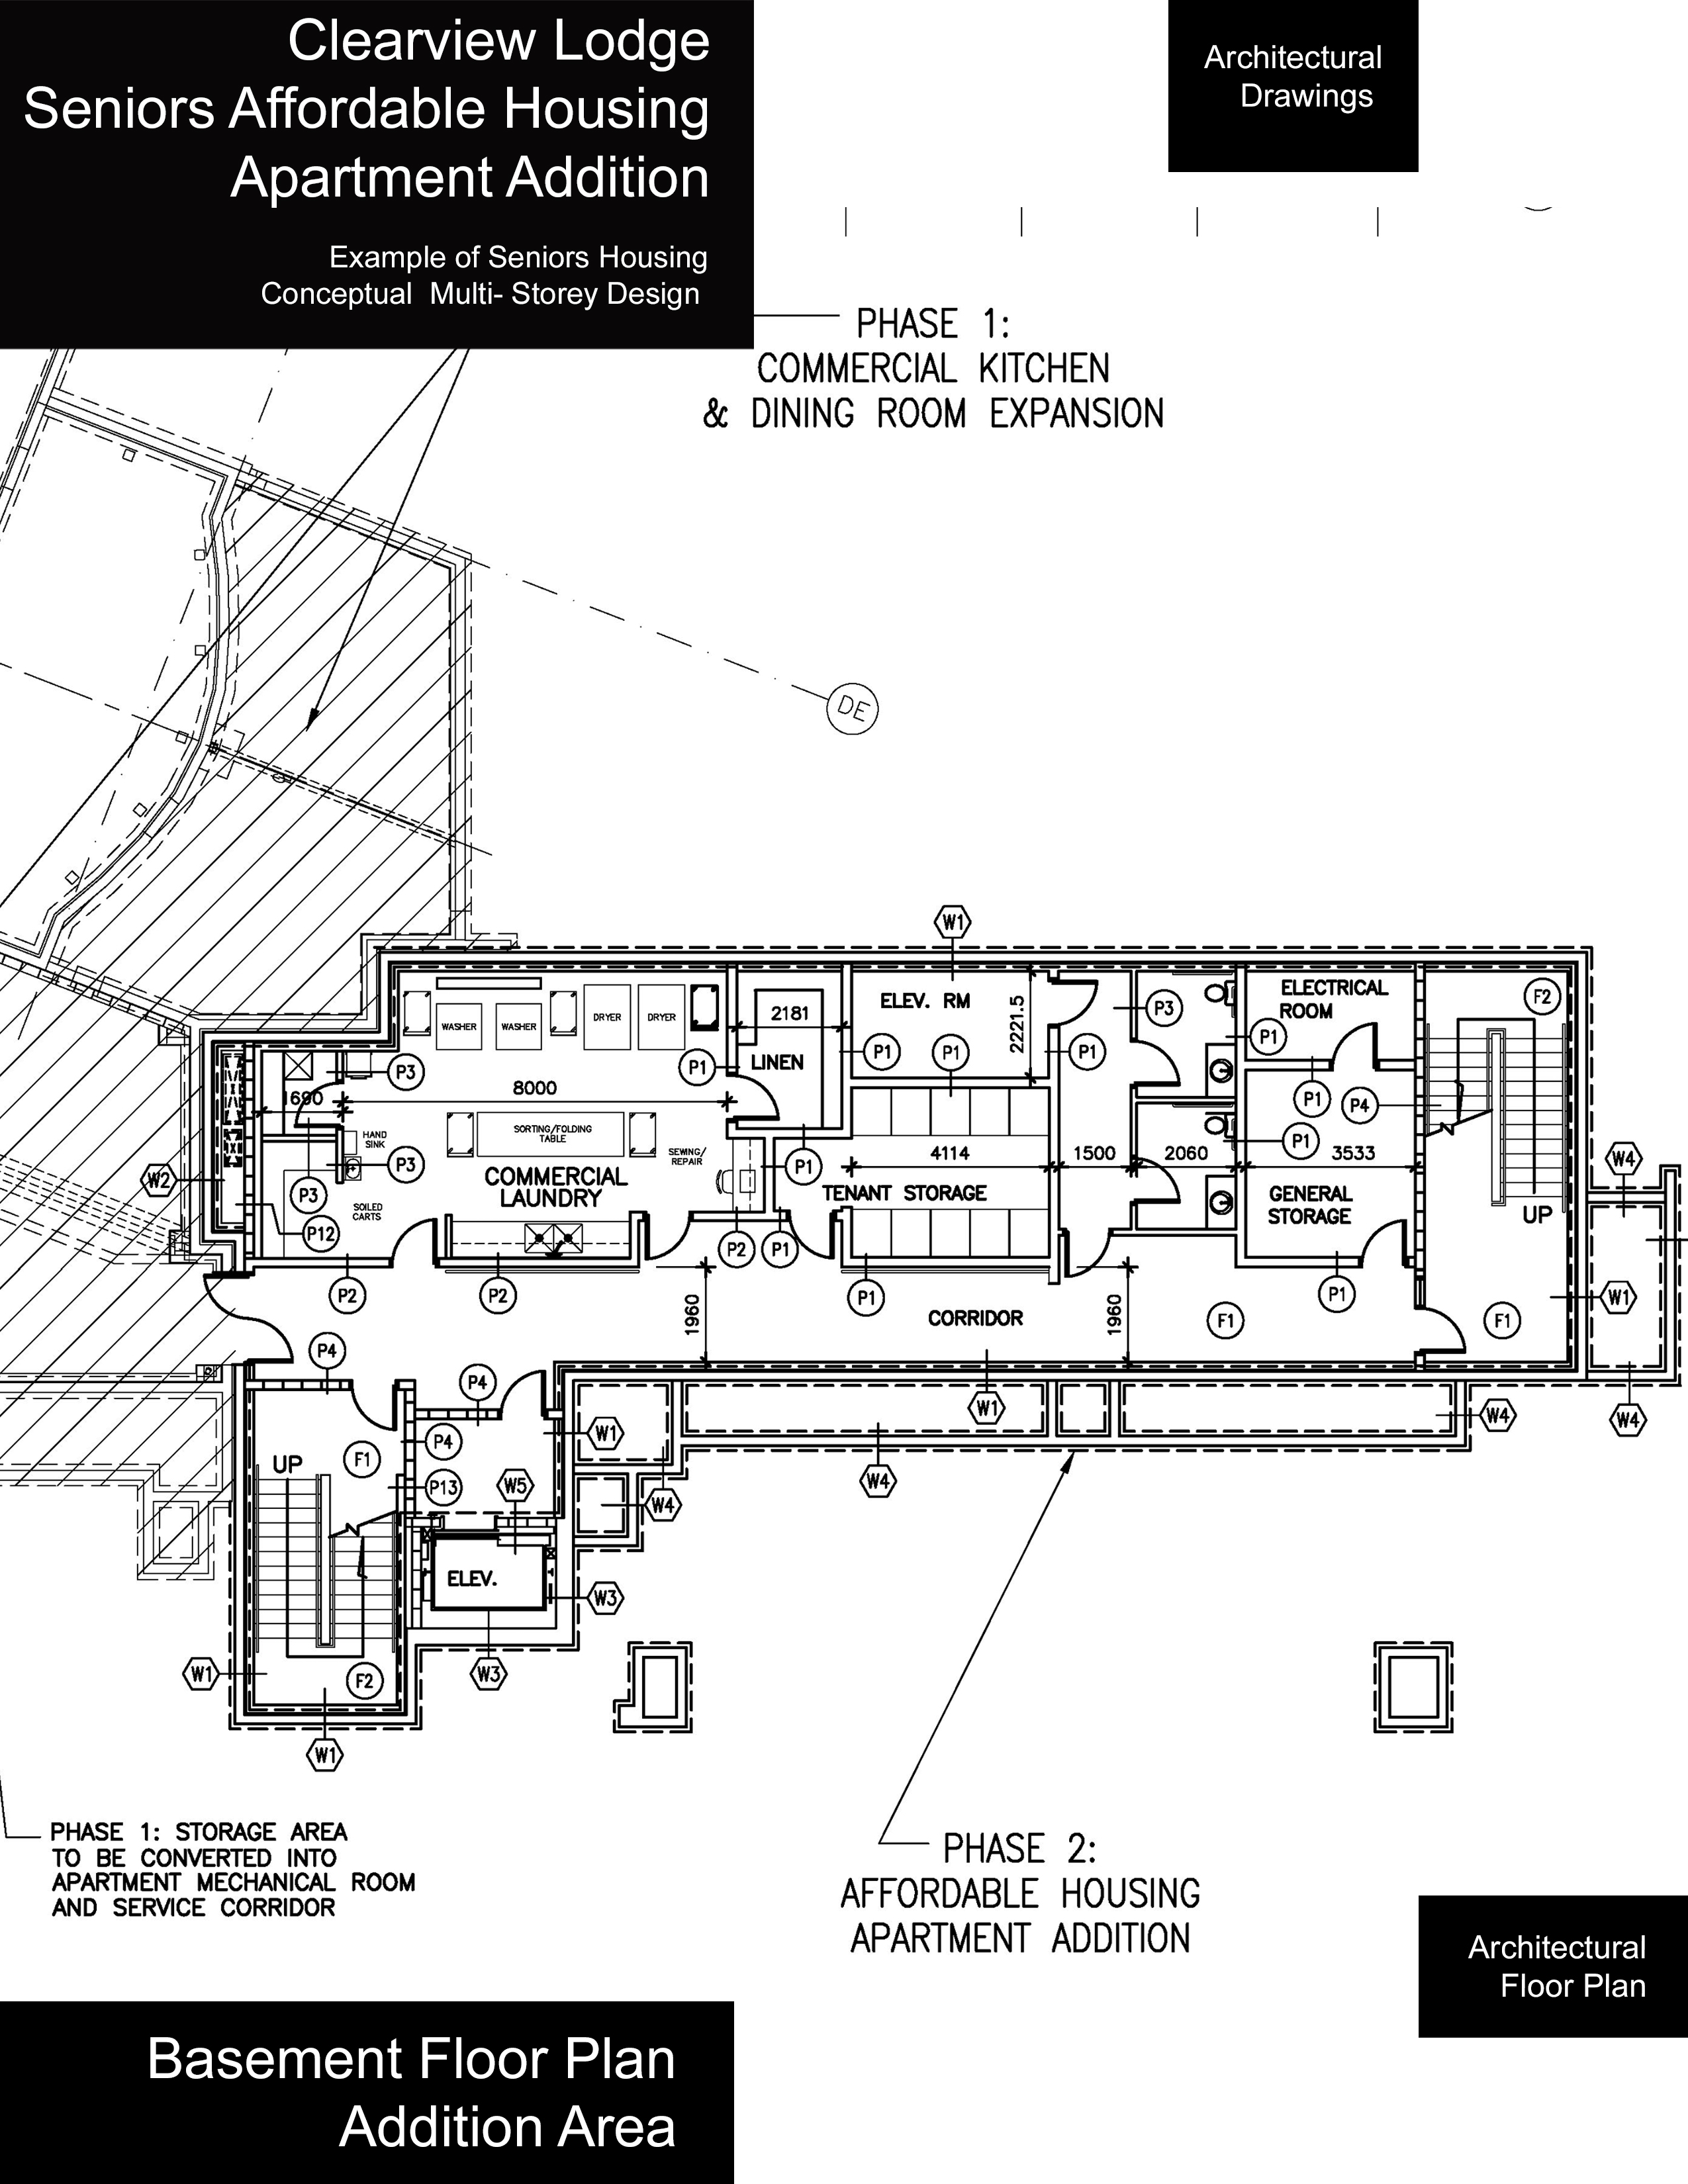 Clearview_Lodge_rApartment_Additions_sheet_2.jpg